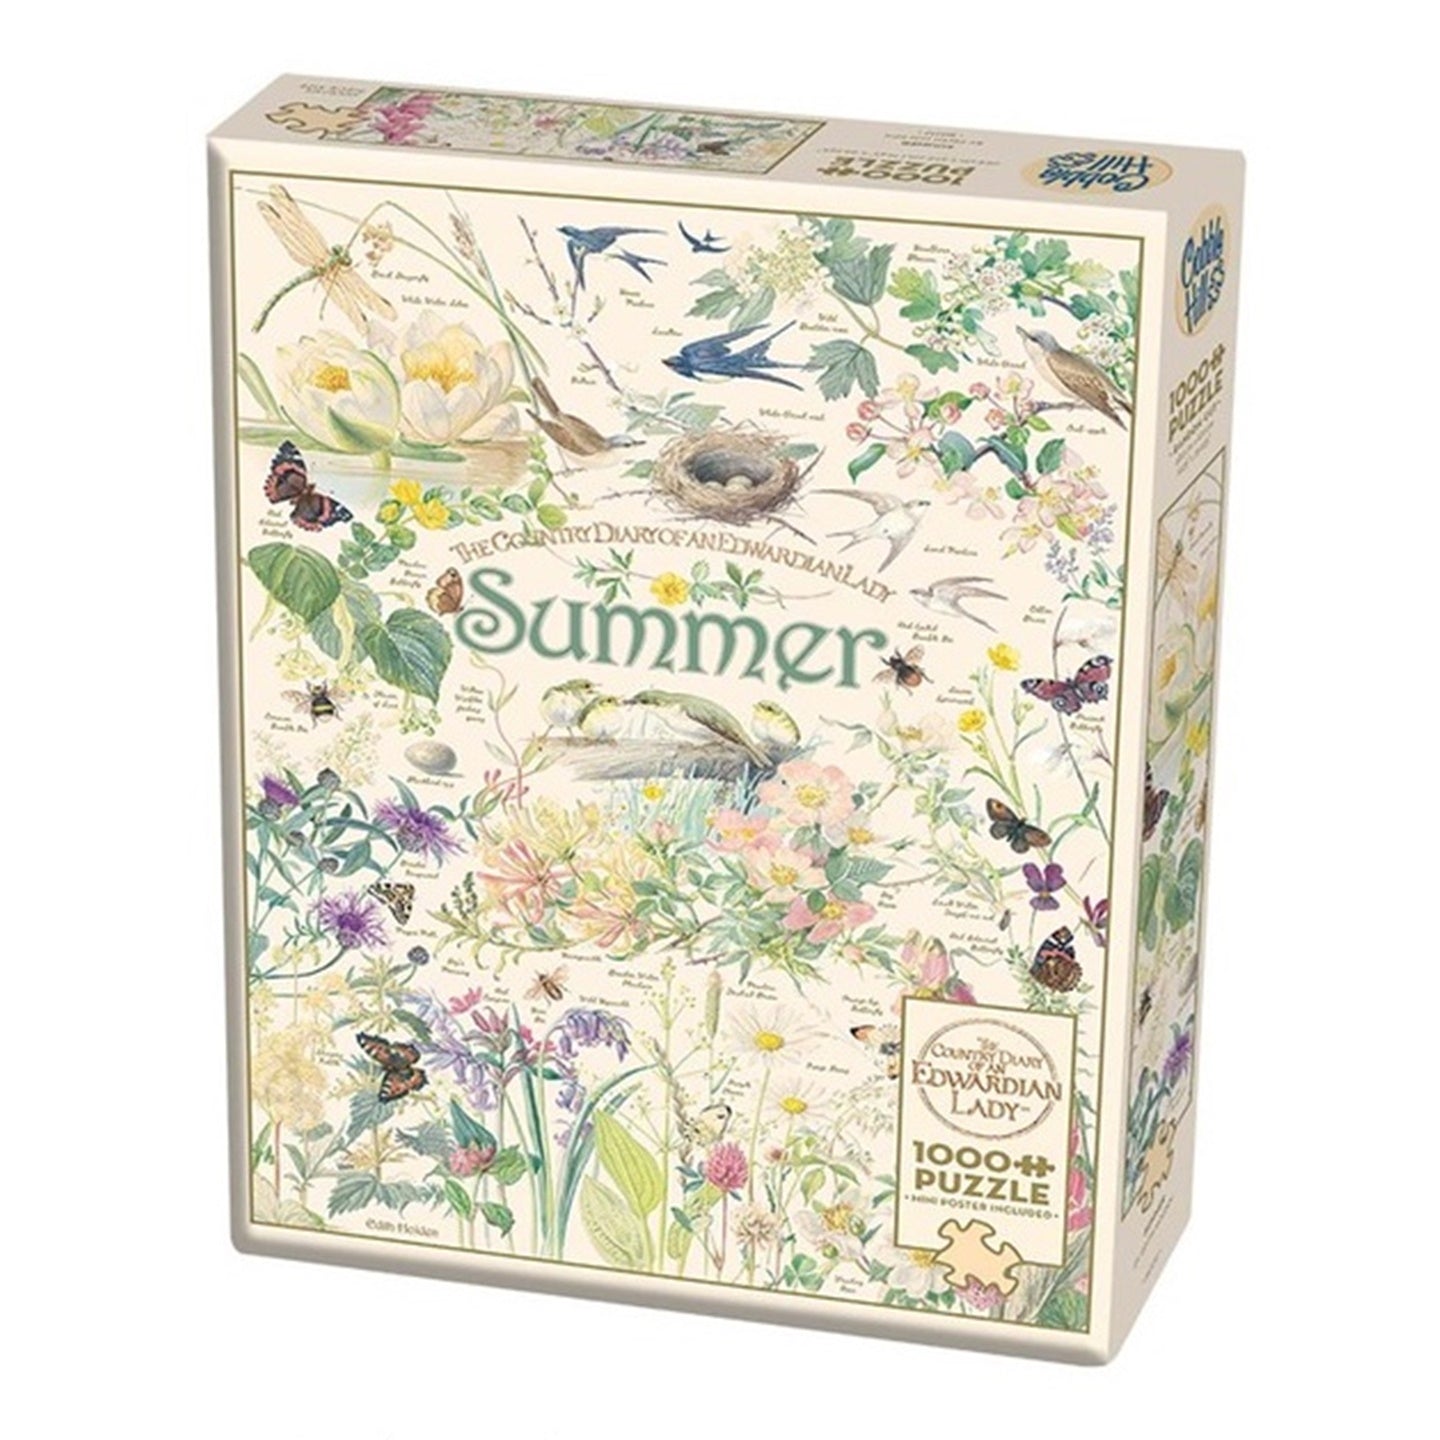 Puzzle Frame Bundle - 1000 Piece - Country Diary Summer